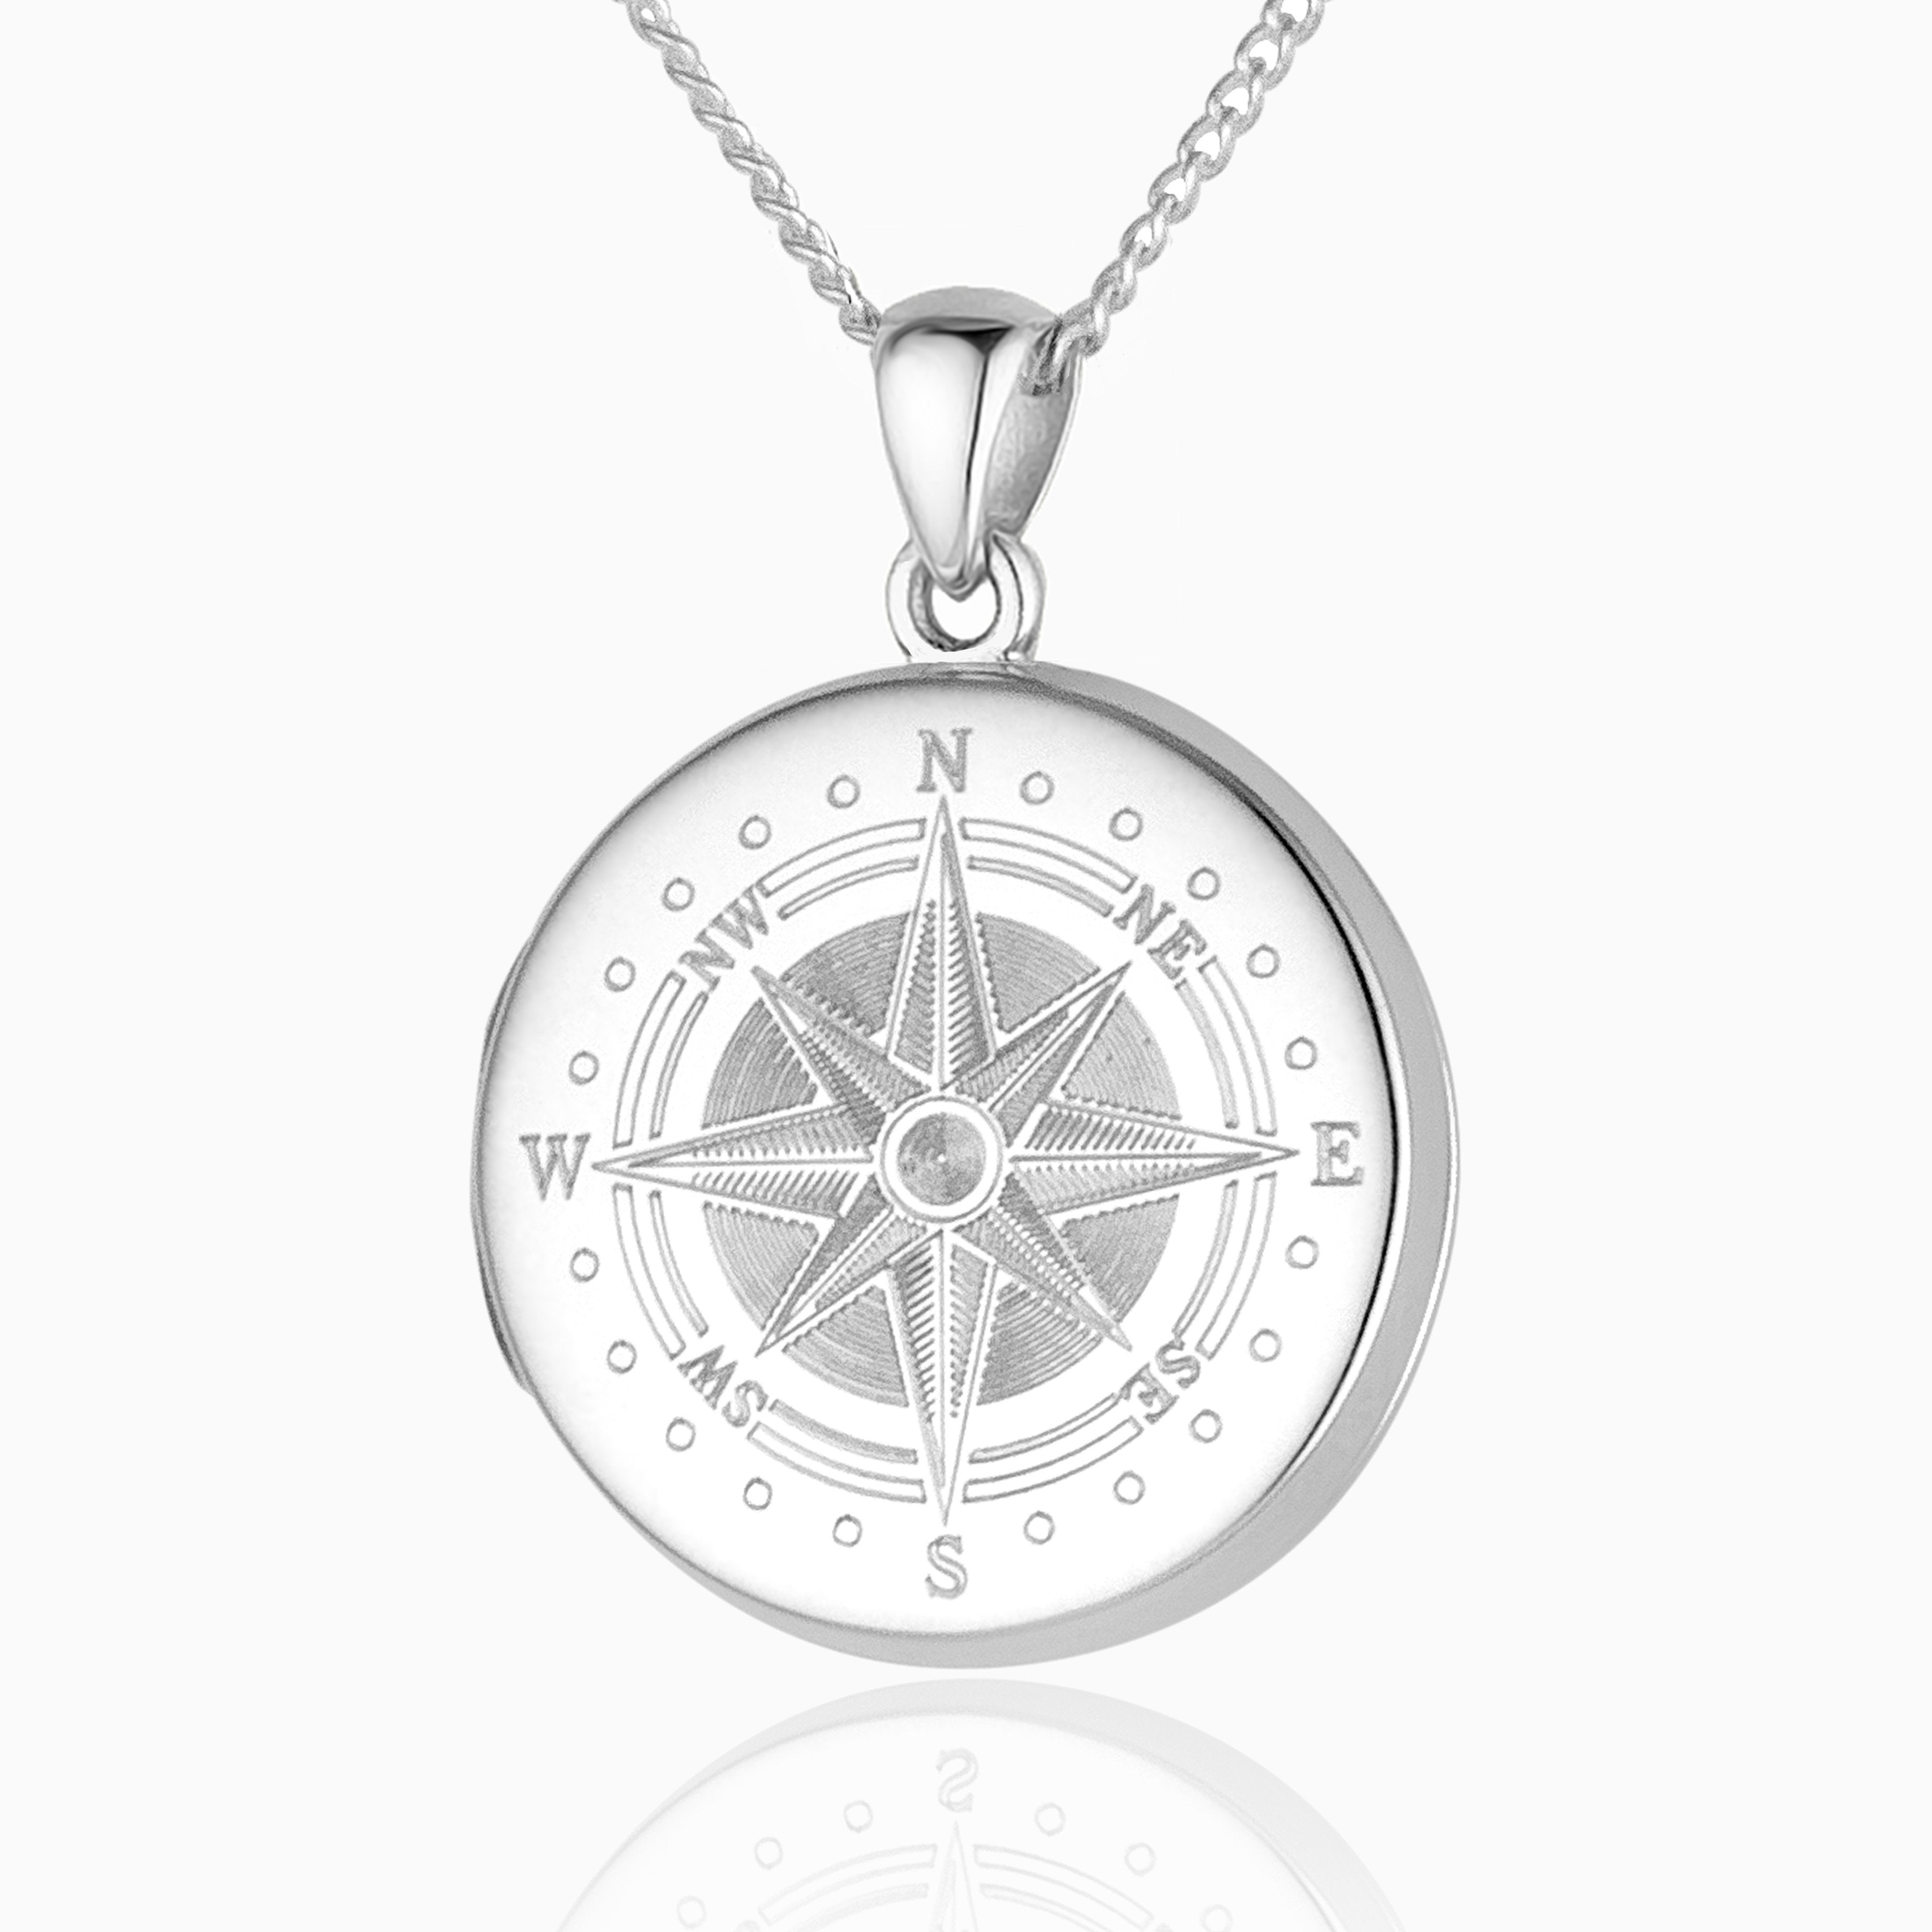 Product title: Silver Compass Locket, product type: Locket